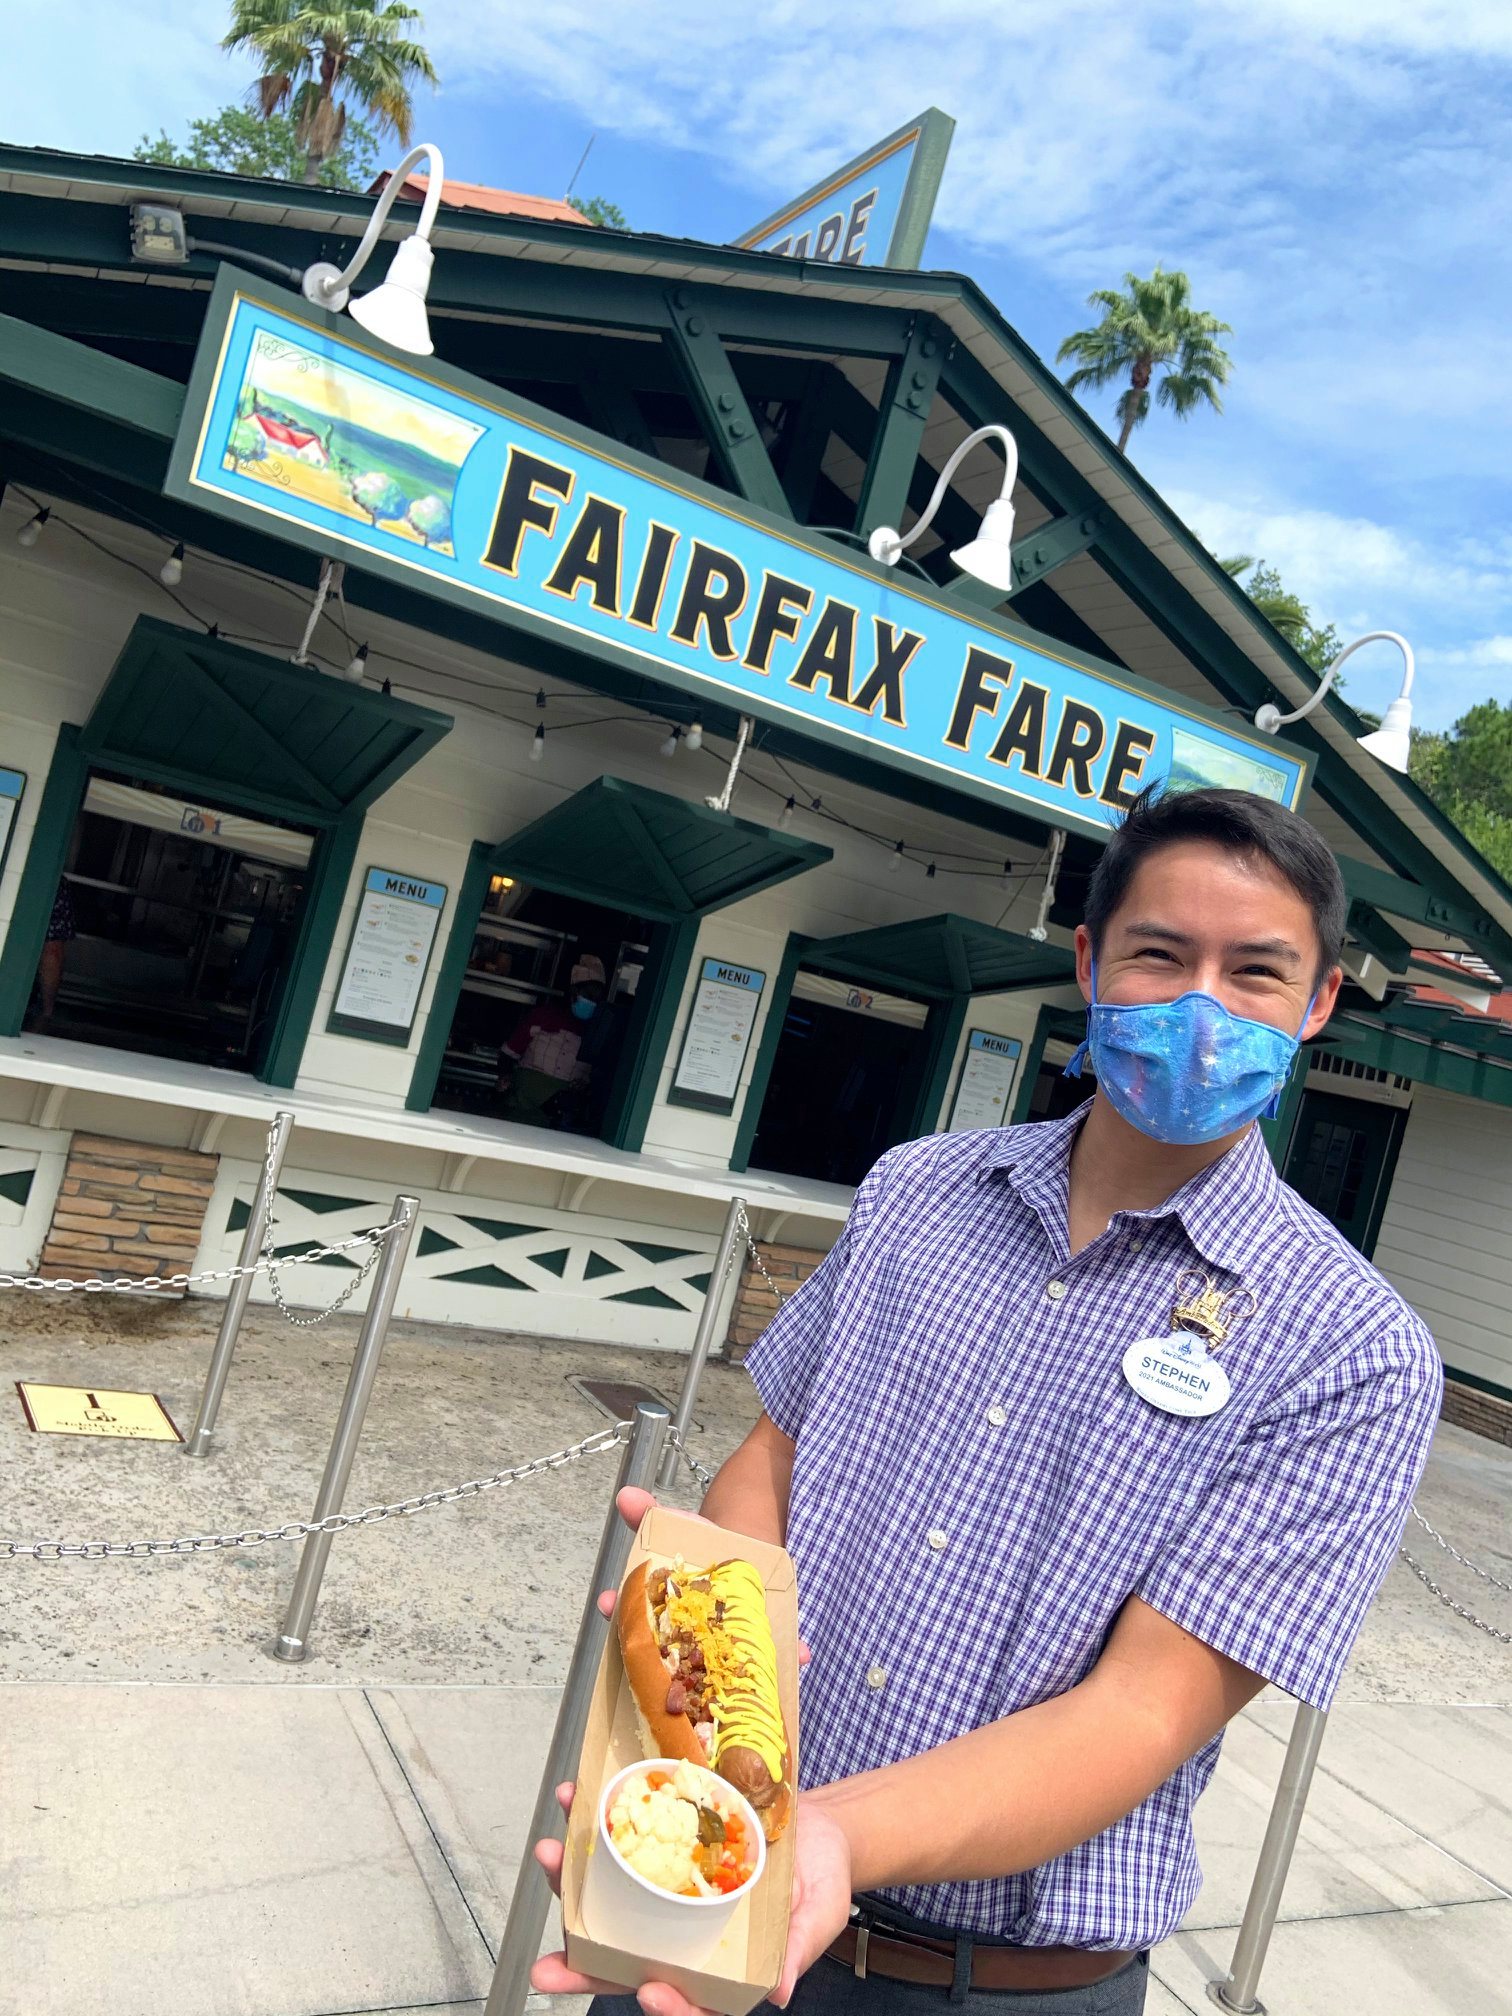 Disney Cast Members Celebrate the reopening of Fairfax Fare with a brand-new menu